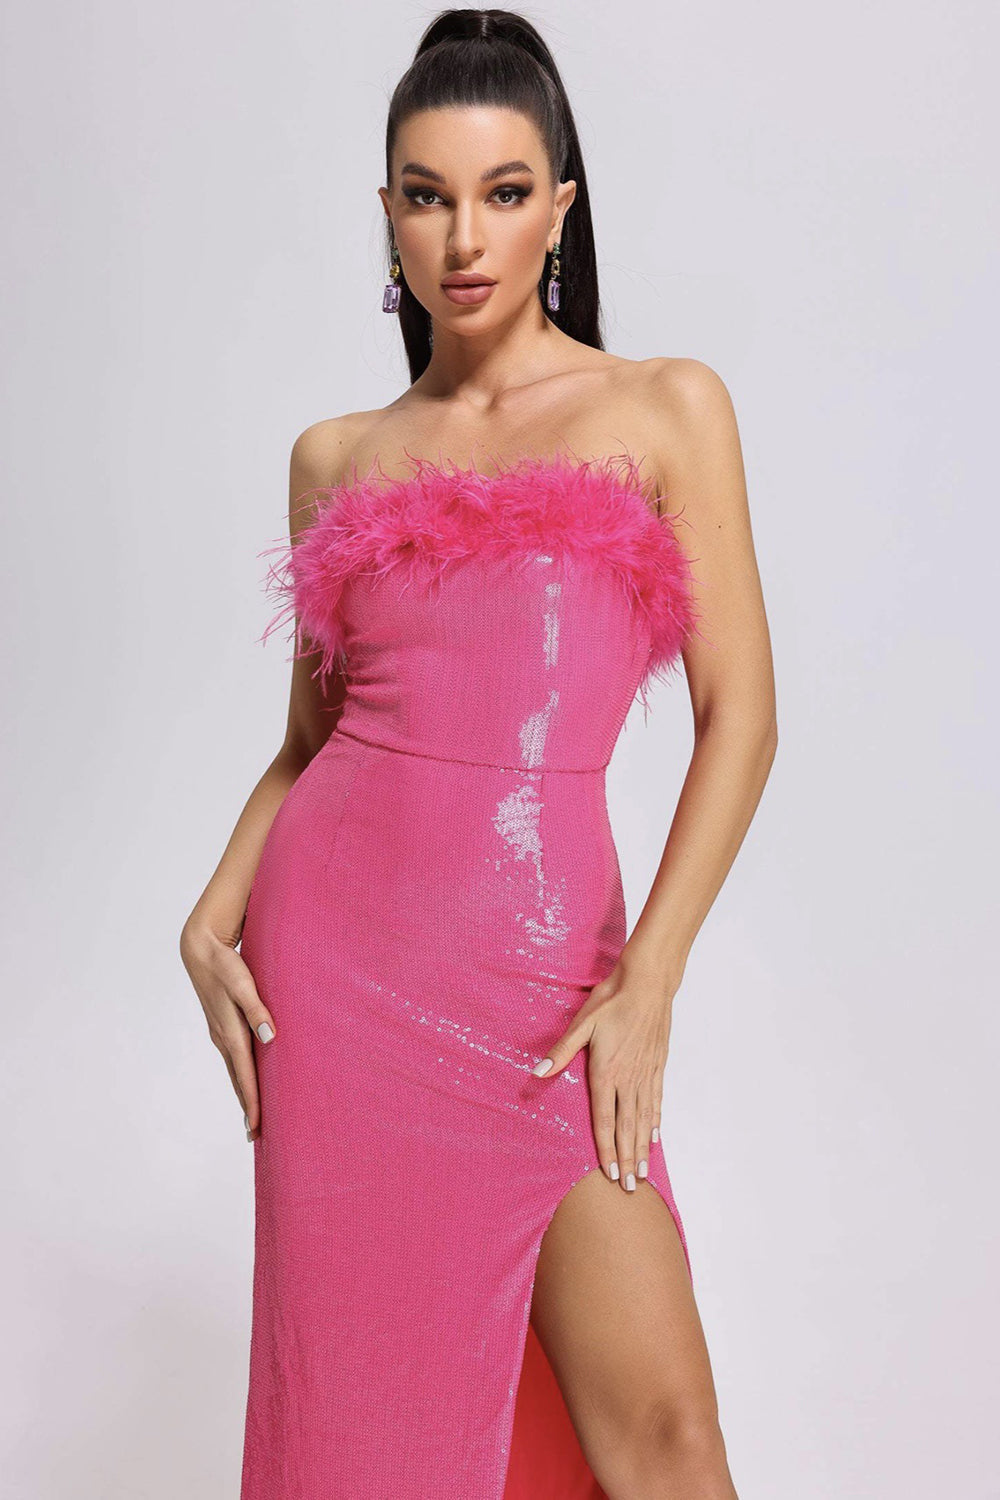 Hot Pink Strapless Sequins Sparkly Ball Dress with Feathers